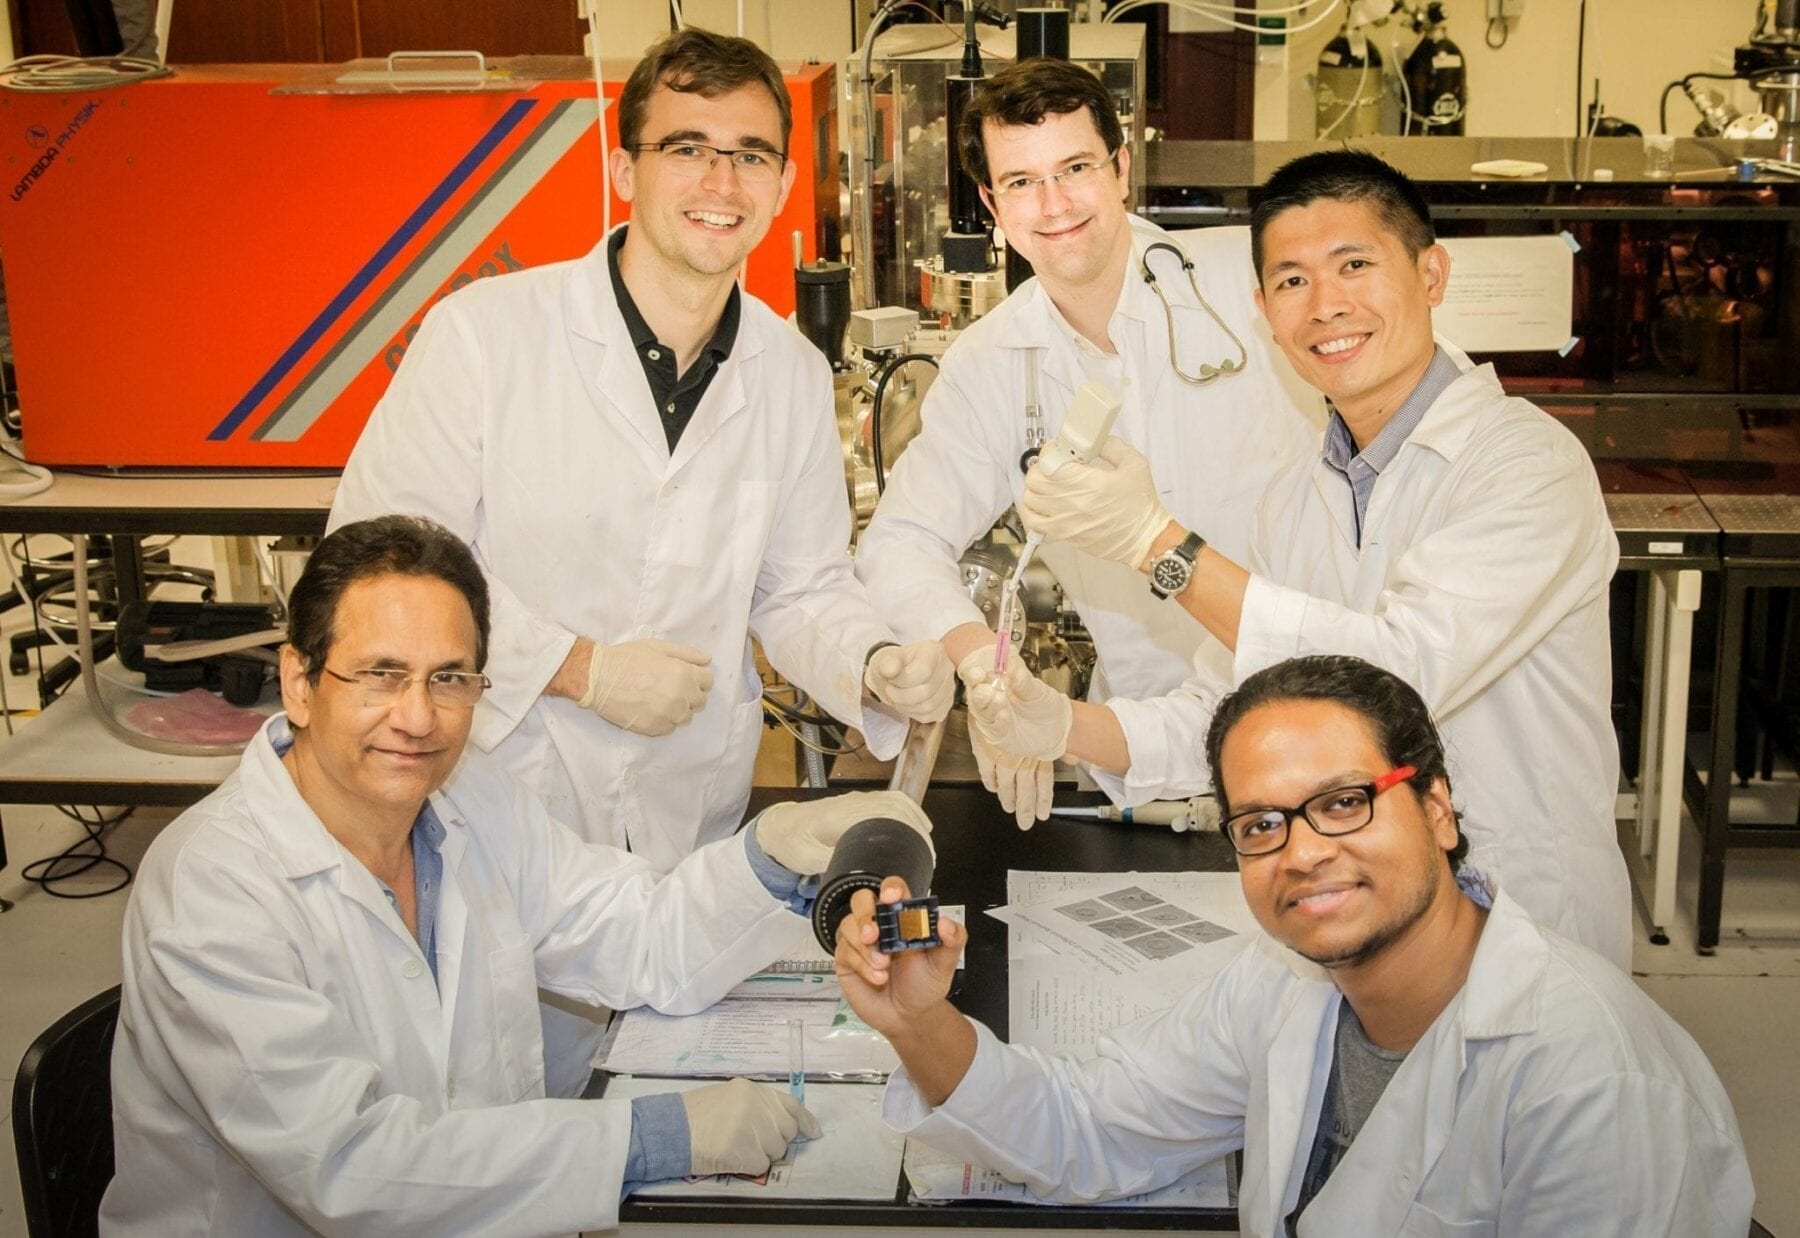 Carbon research may boost nanoelectronics